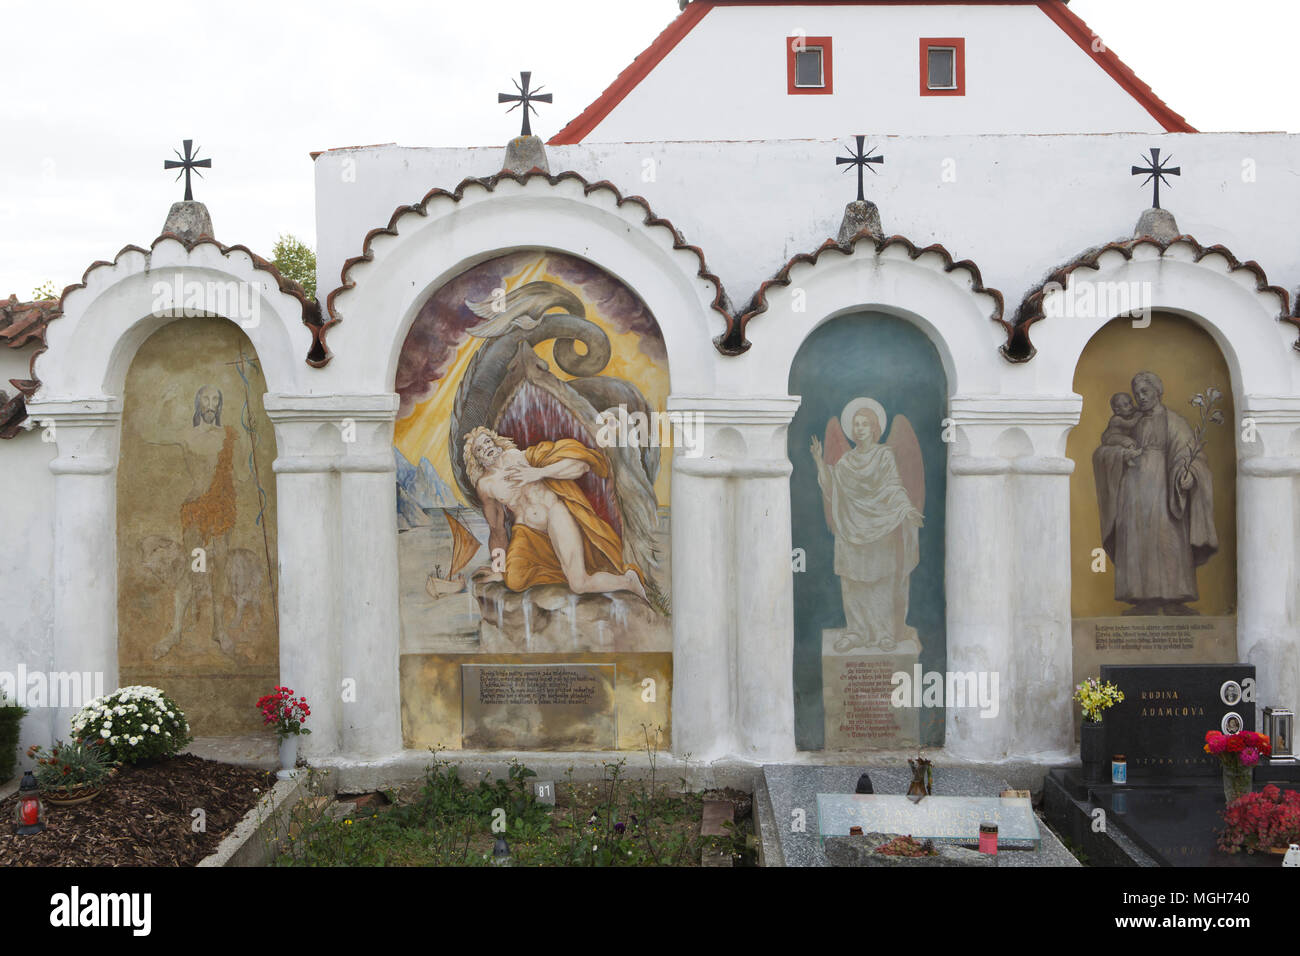 Funeral chapels with mural paintings at the village cemetery in Albrechtice nad Vltavou in South Bohemian Region, Czech Republic. Saint John the Baptist, Jonah and the Giant Fish and the Angel are depicted in the chapels from left to right. Funeral chapels placed on the cemetery wall were decorated with murals in the 1840s by local painter František Mikule conducted with parish priest Vít Cíza, who also composed poems for each mural. The murals were repainted several times during the 19th and 20th centuries and completely restored by the team led by Jitka Musilová in 2010-2013. Stock Photo